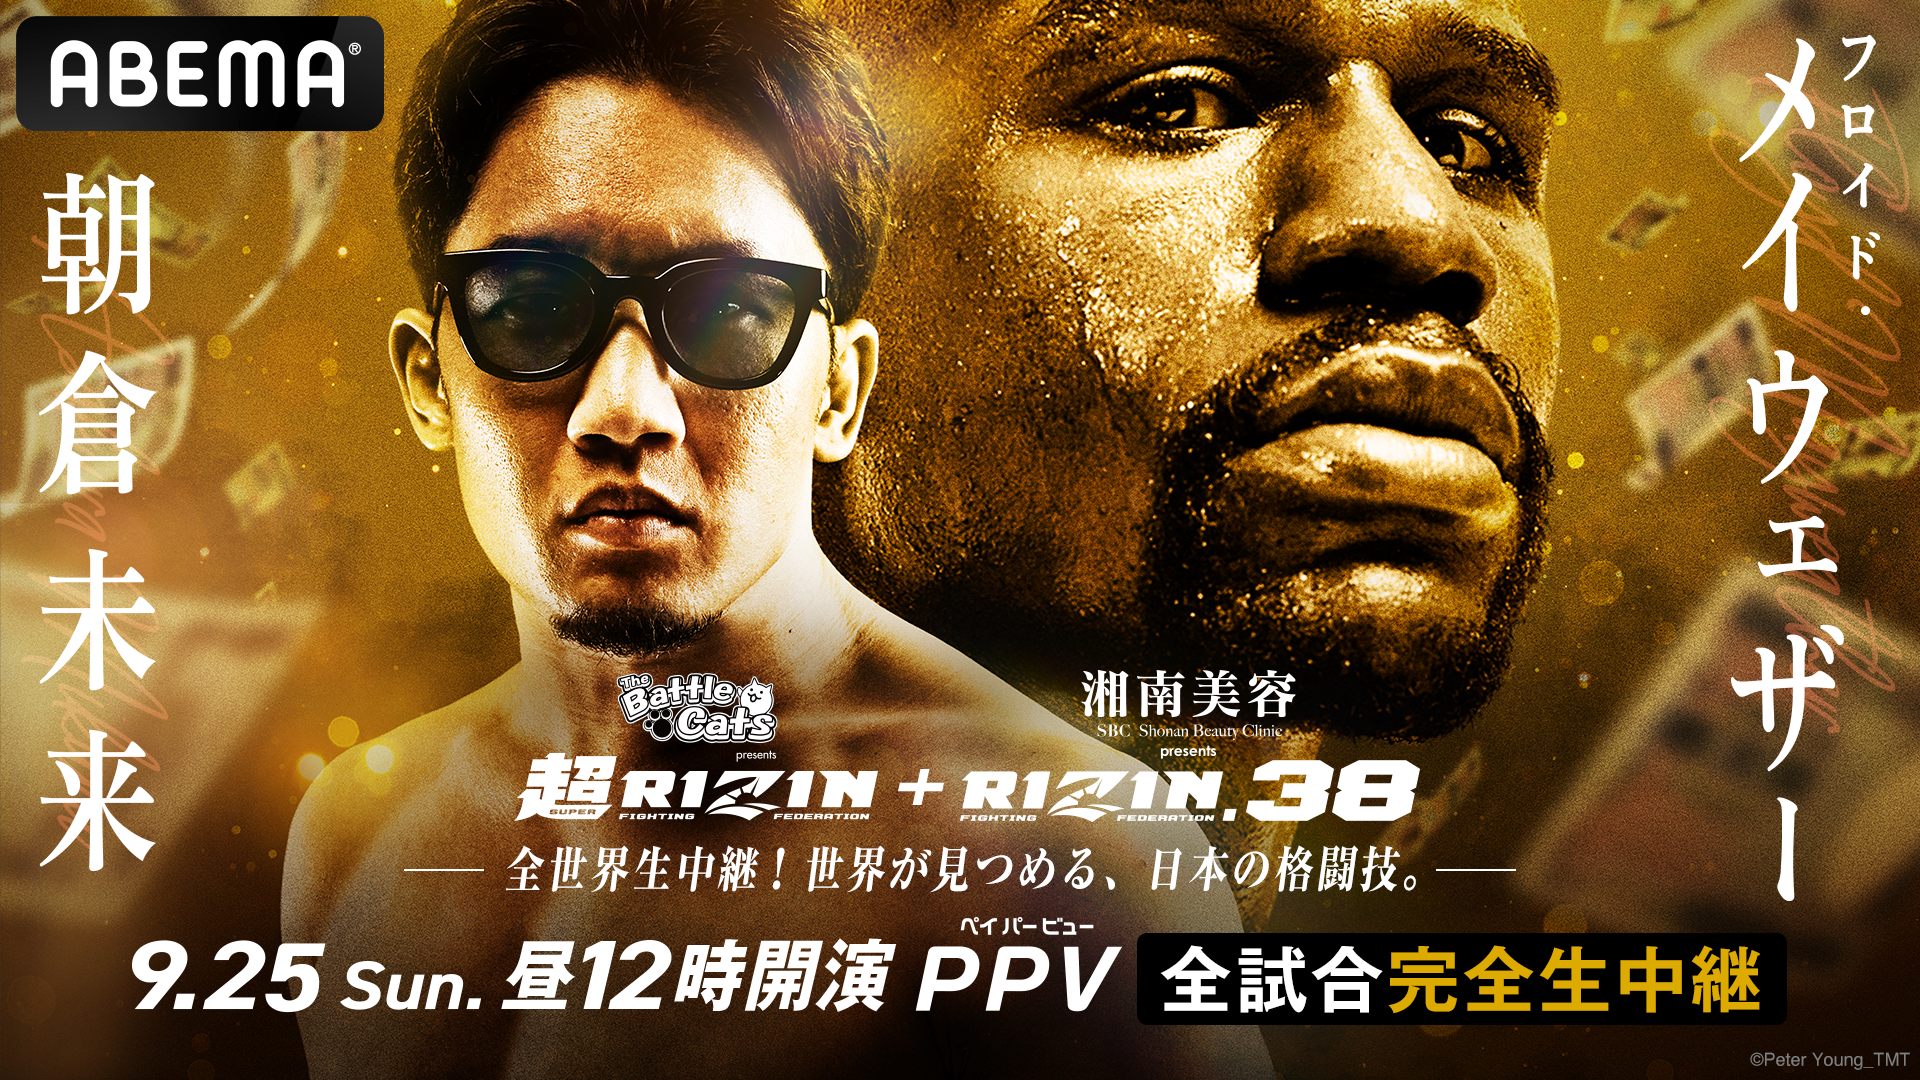 Floyd Mayweather and Mikuru Asakawa Face Off in ABEMAs Complete Live Coverage of SUPER RIZIN and RIZIN.38 Matches Starting Sunday, September 25 CyberAgent, Inc.